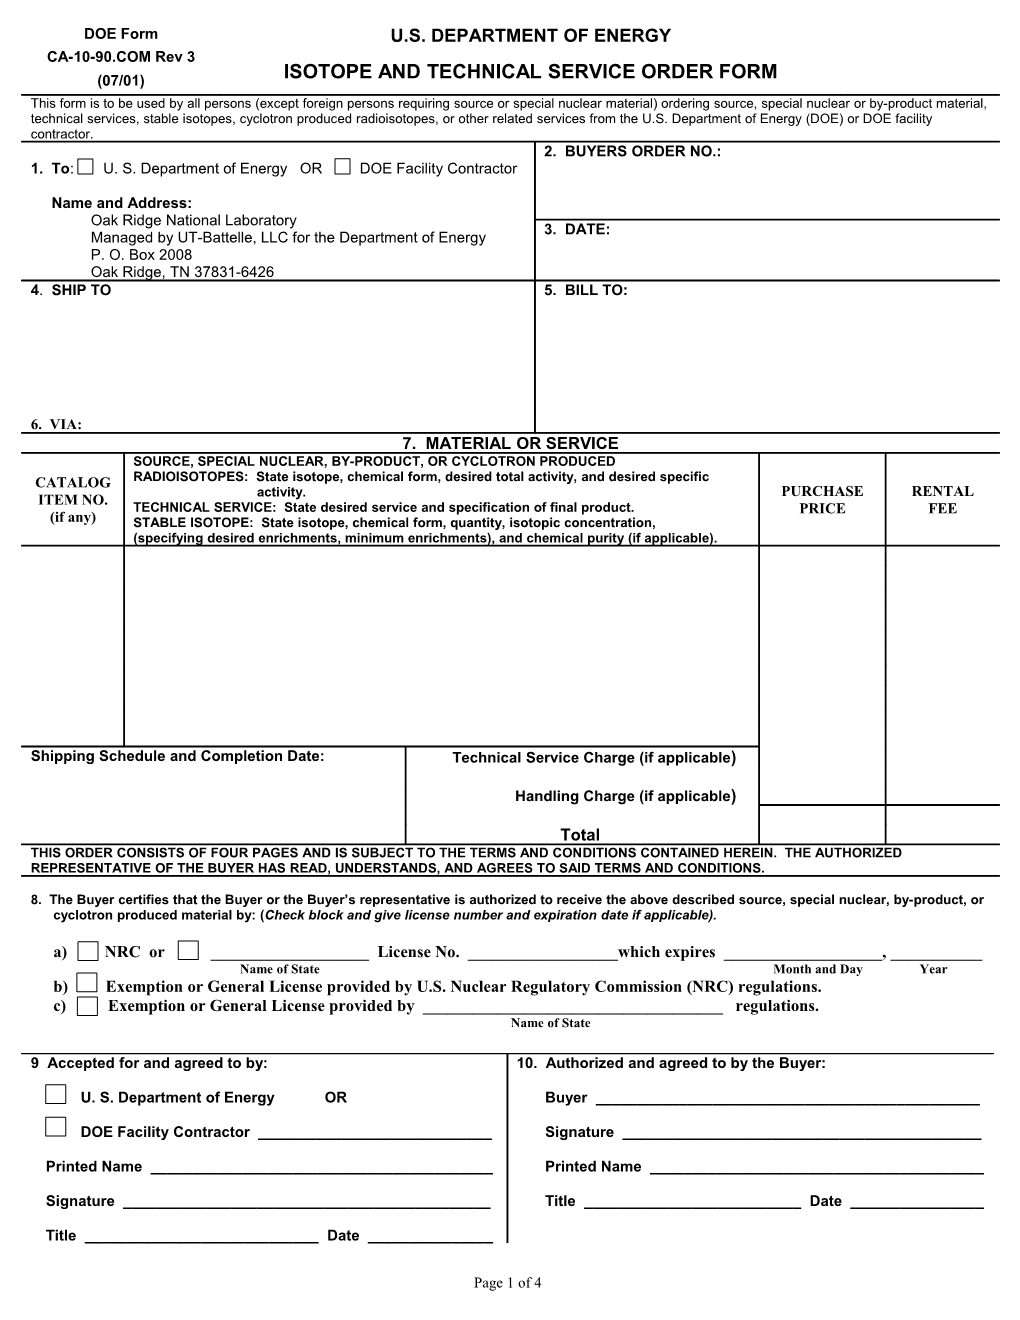 Isotope and Technical Services Order Form